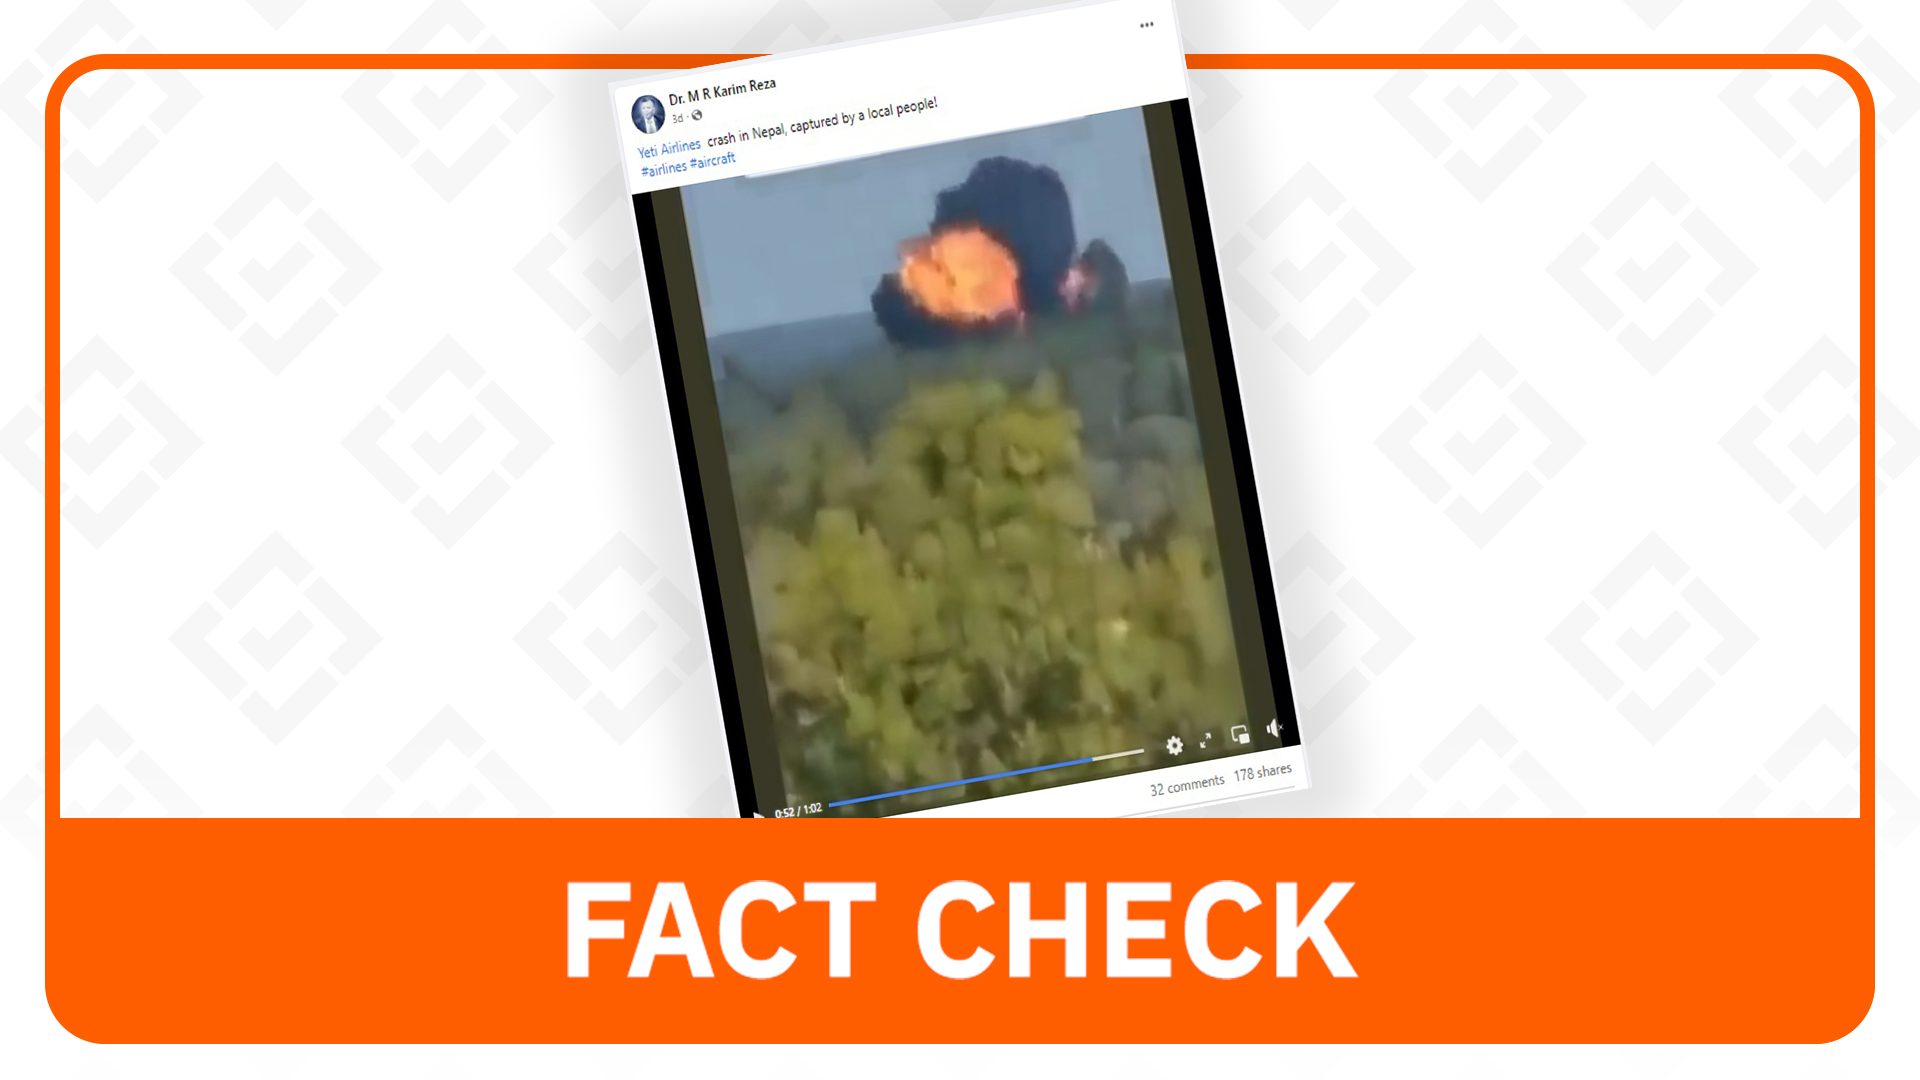 FACT CHECK: Russian plane in crash video labeled as Nepal’s